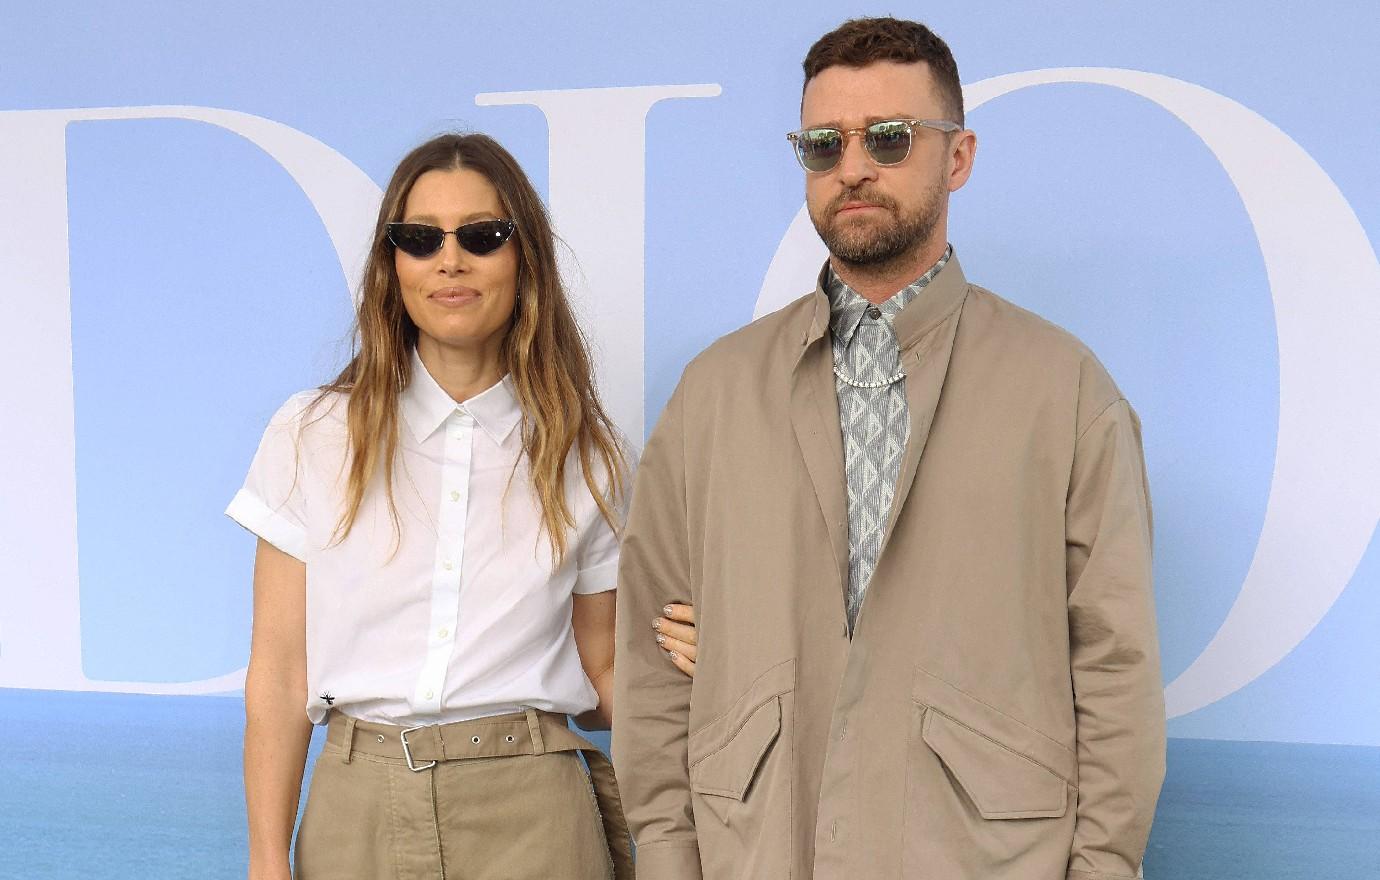 Jessica Biel Shares RARE Photos of Her Kids in a Touching Post to